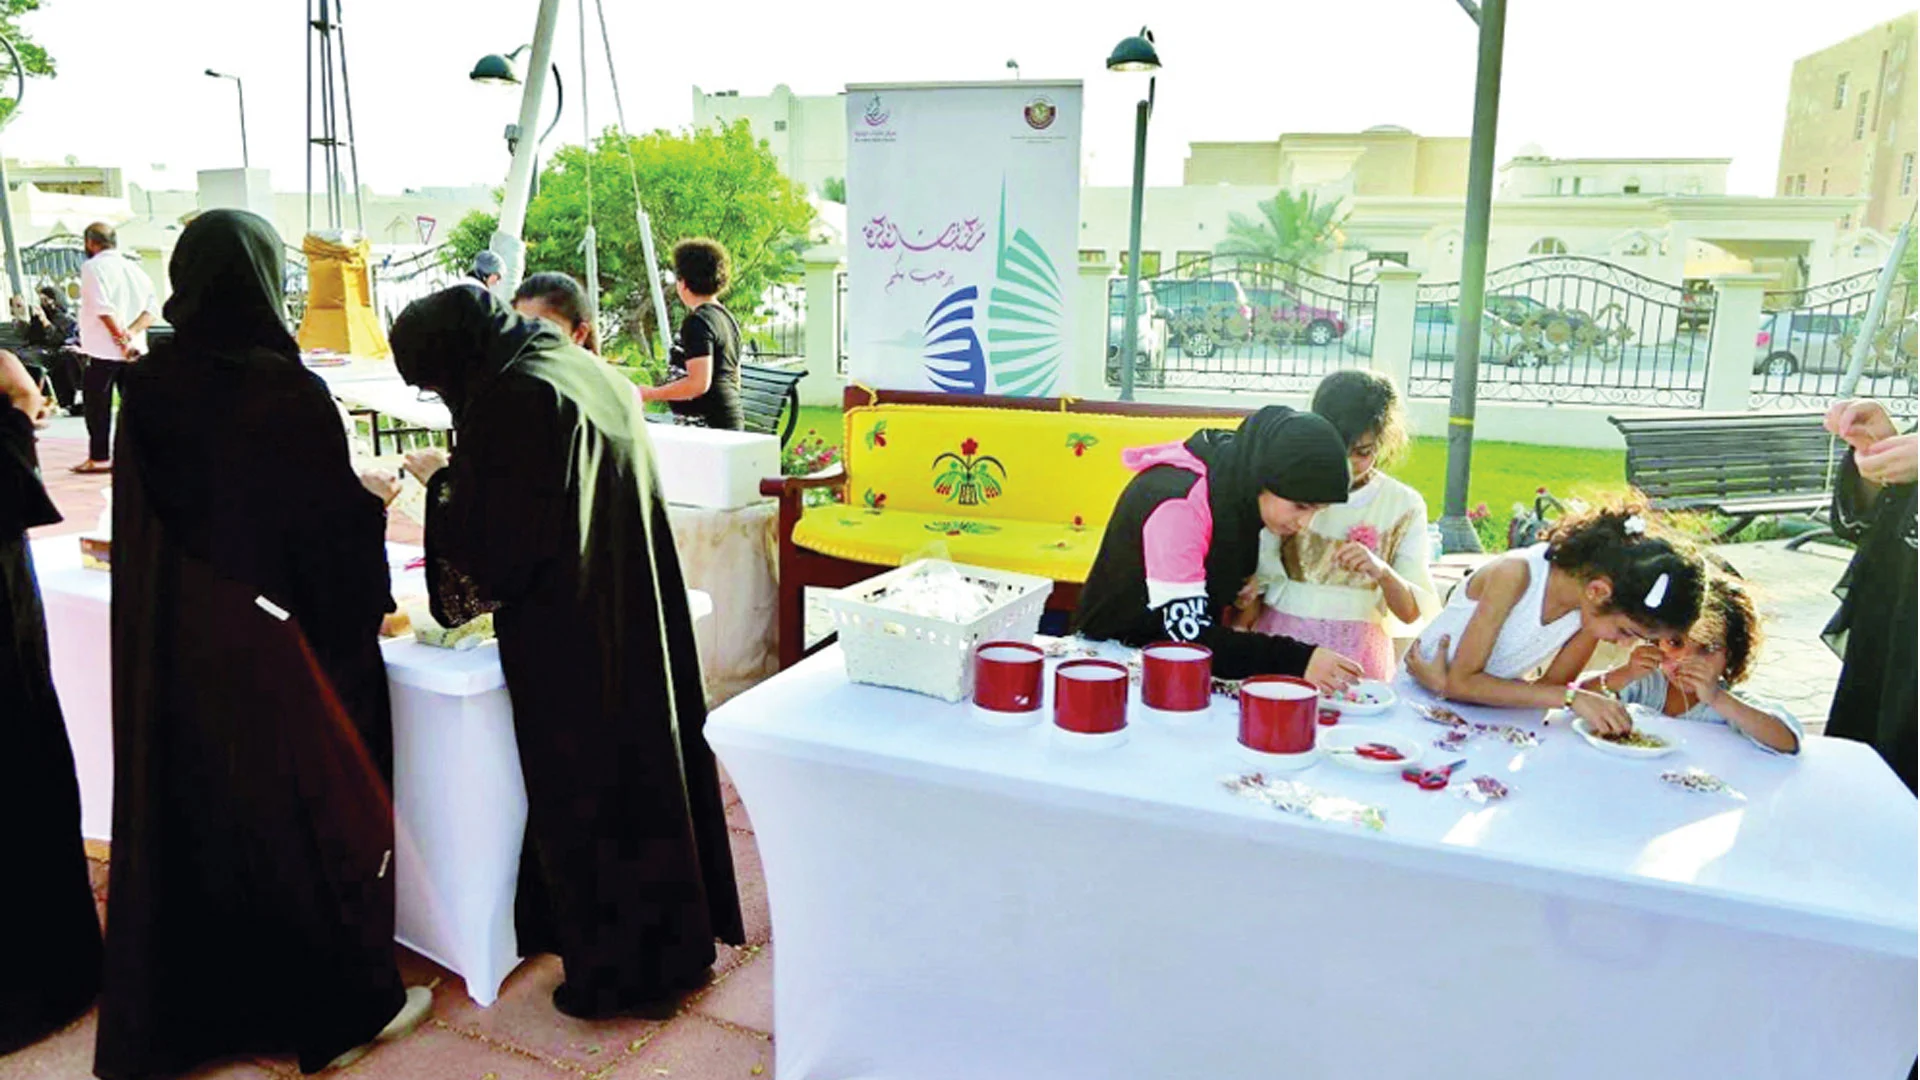 Ministry of Culture Announces Resumption of Al Baraha Event on Friday